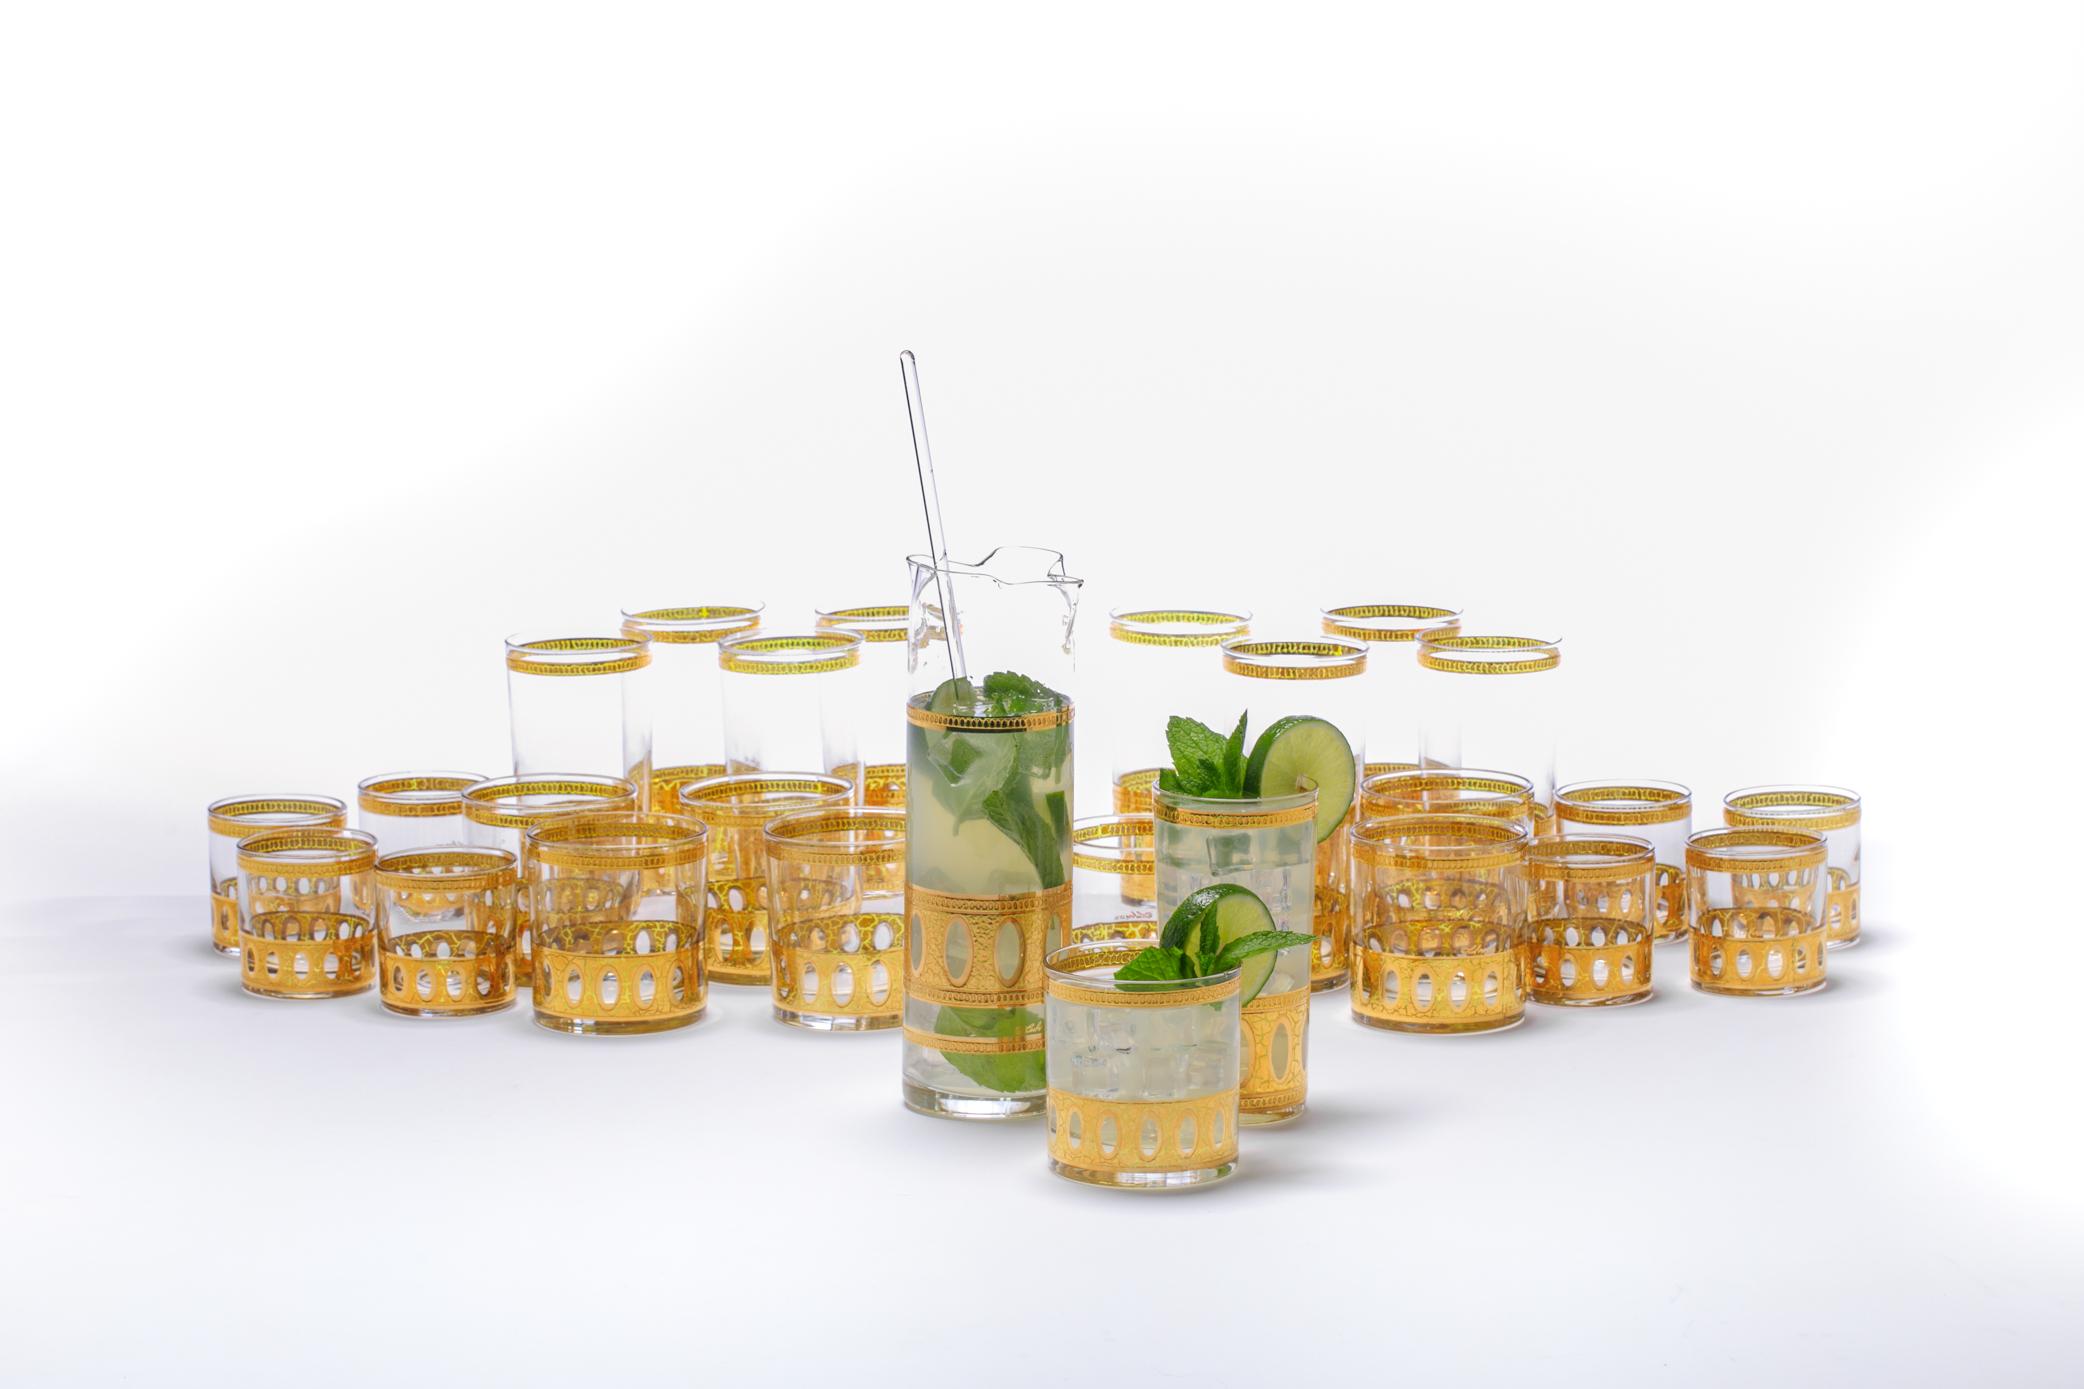 Dress your cocktails in high style with these beautiful tall highball cocktail glasses in mint condition. This Mid Century Modern set dates back to the 1960s - dressing up sexy bars for decades - and features an elegant 22-karat gold plated MCM